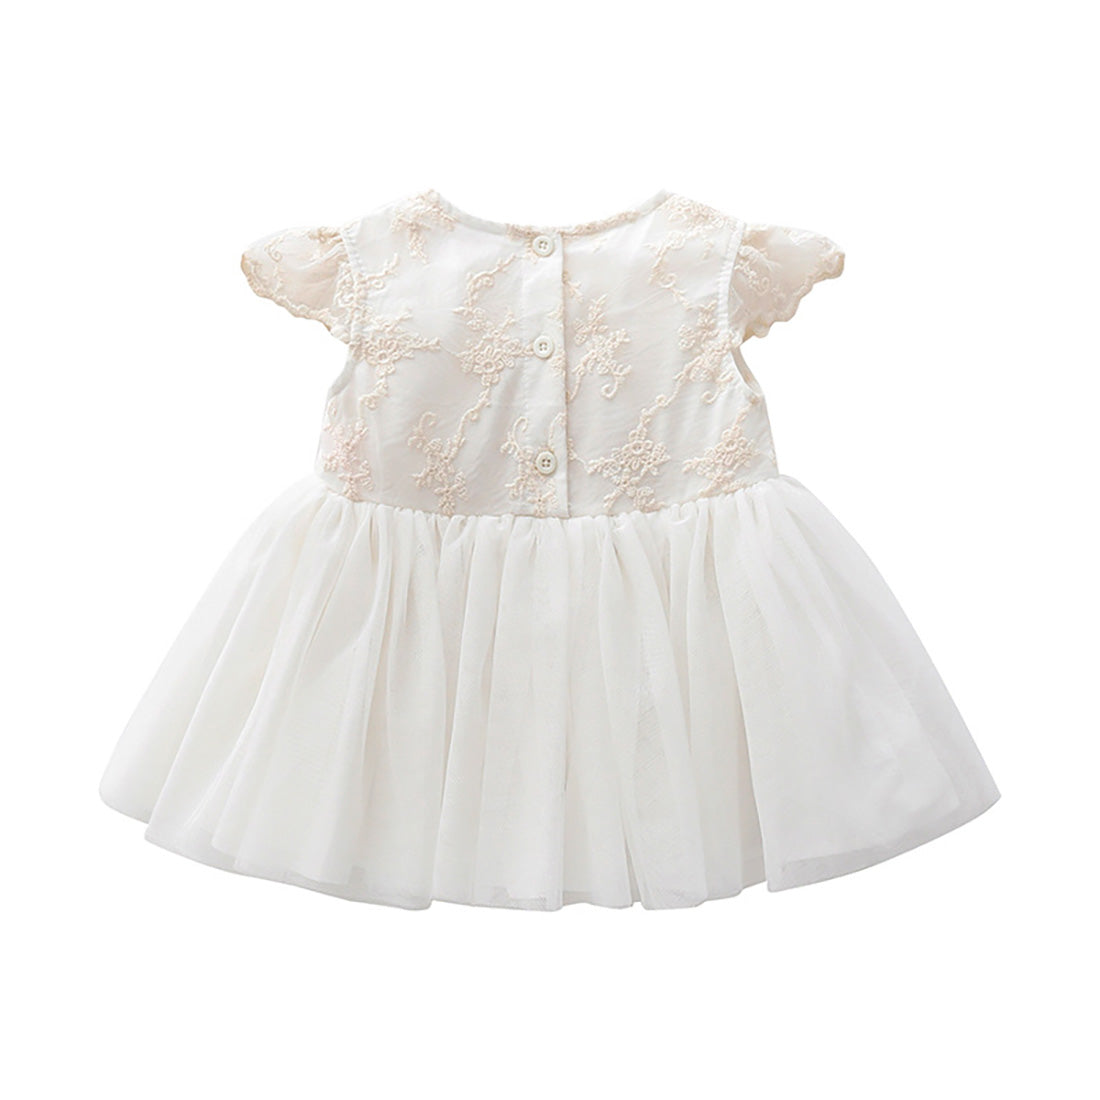 Baby Infant Girls Lace Tulle Occasion Dress with Headband